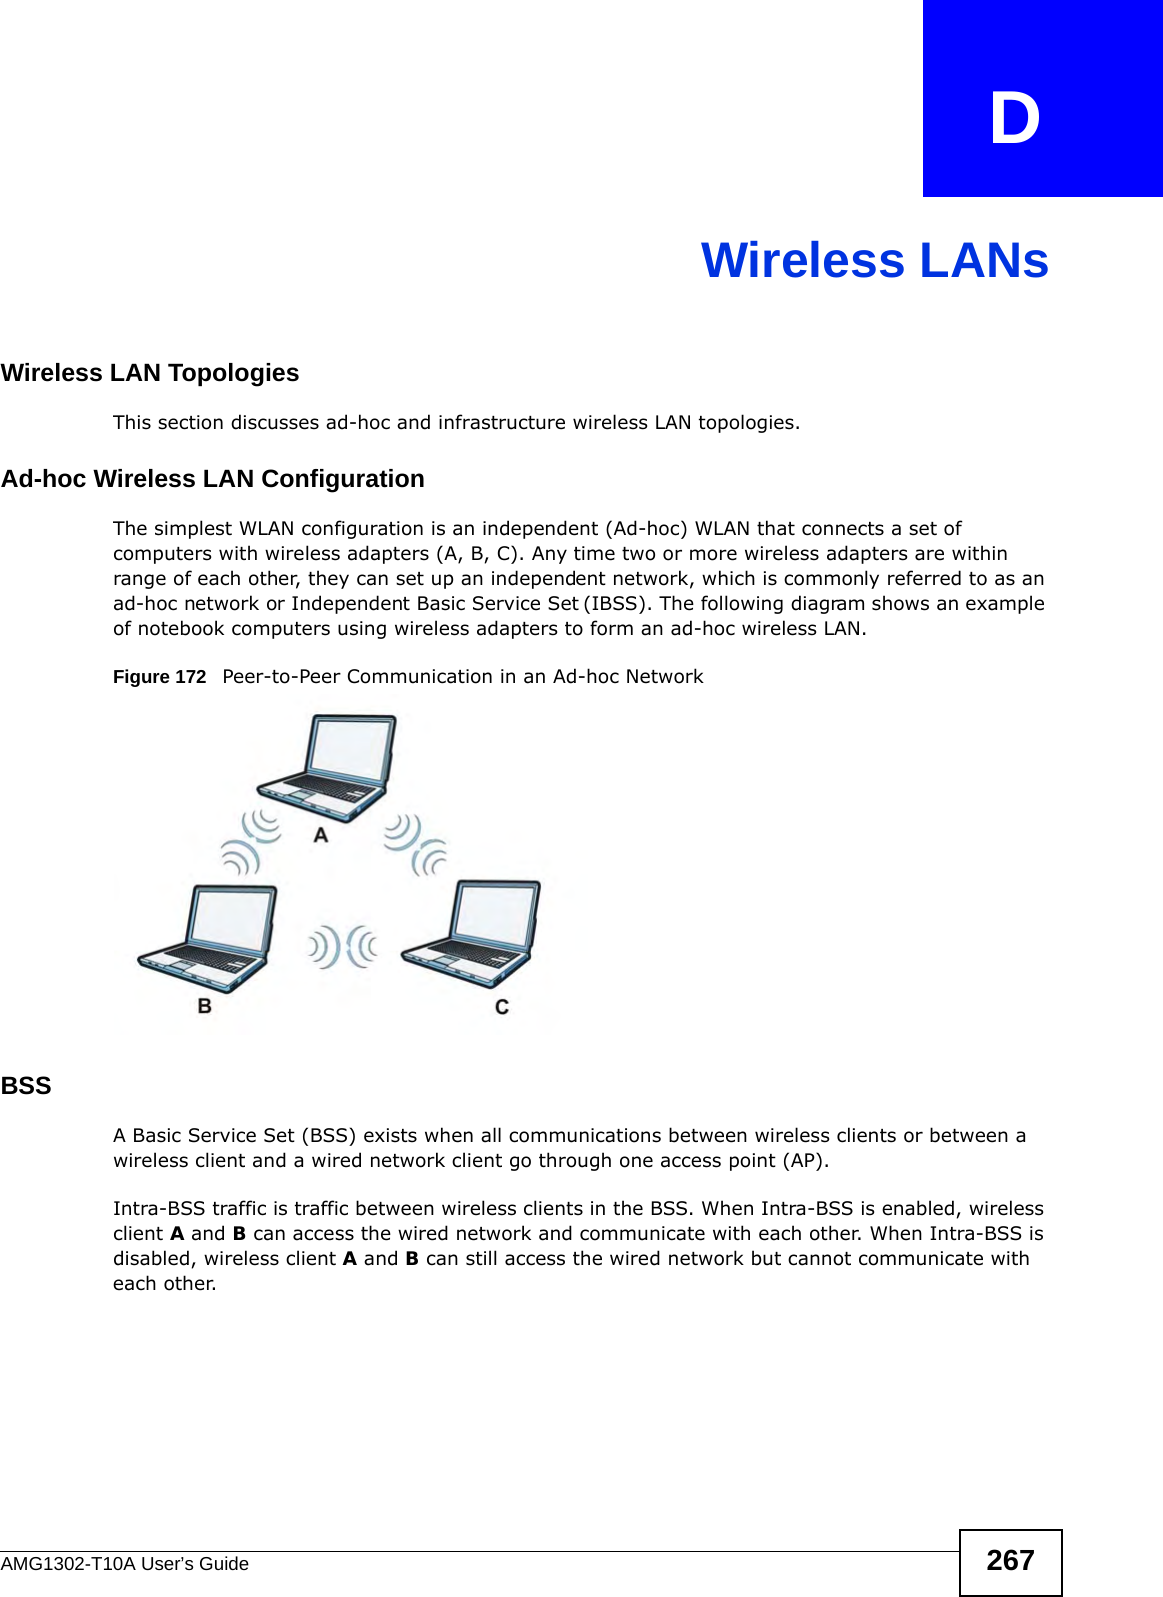 AMG1302-T10A User’s Guide 267APPENDIX   DWireless LANsWireless LAN TopologiesThis section discusses ad-hoc and infrastructure wireless LAN topologies.Ad-hoc Wireless LAN ConfigurationThe simplest WLAN configuration is an independent (Ad-hoc) WLAN that connects a set of computers with wireless adapters (A, B, C). Any time two or more wireless adapters are within range of each other, they can set up an independent network, which is commonly referred to as an ad-hoc network or Independent Basic Service Set (IBSS). The following diagram shows an example of notebook computers using wireless adapters to form an ad-hoc wireless LAN. Figure 172   Peer-to-Peer Communication in an Ad-hoc NetworkBSSA Basic Service Set (BSS) exists when all communications between wireless clients or between a wireless client and a wired network client go through one access point (AP). Intra-BSS traffic is traffic between wireless clients in the BSS. When Intra-BSS is enabled, wireless client A and B can access the wired network and communicate with each other. When Intra-BSS is disabled, wireless client A and B can still access the wired network but cannot communicate with each other.